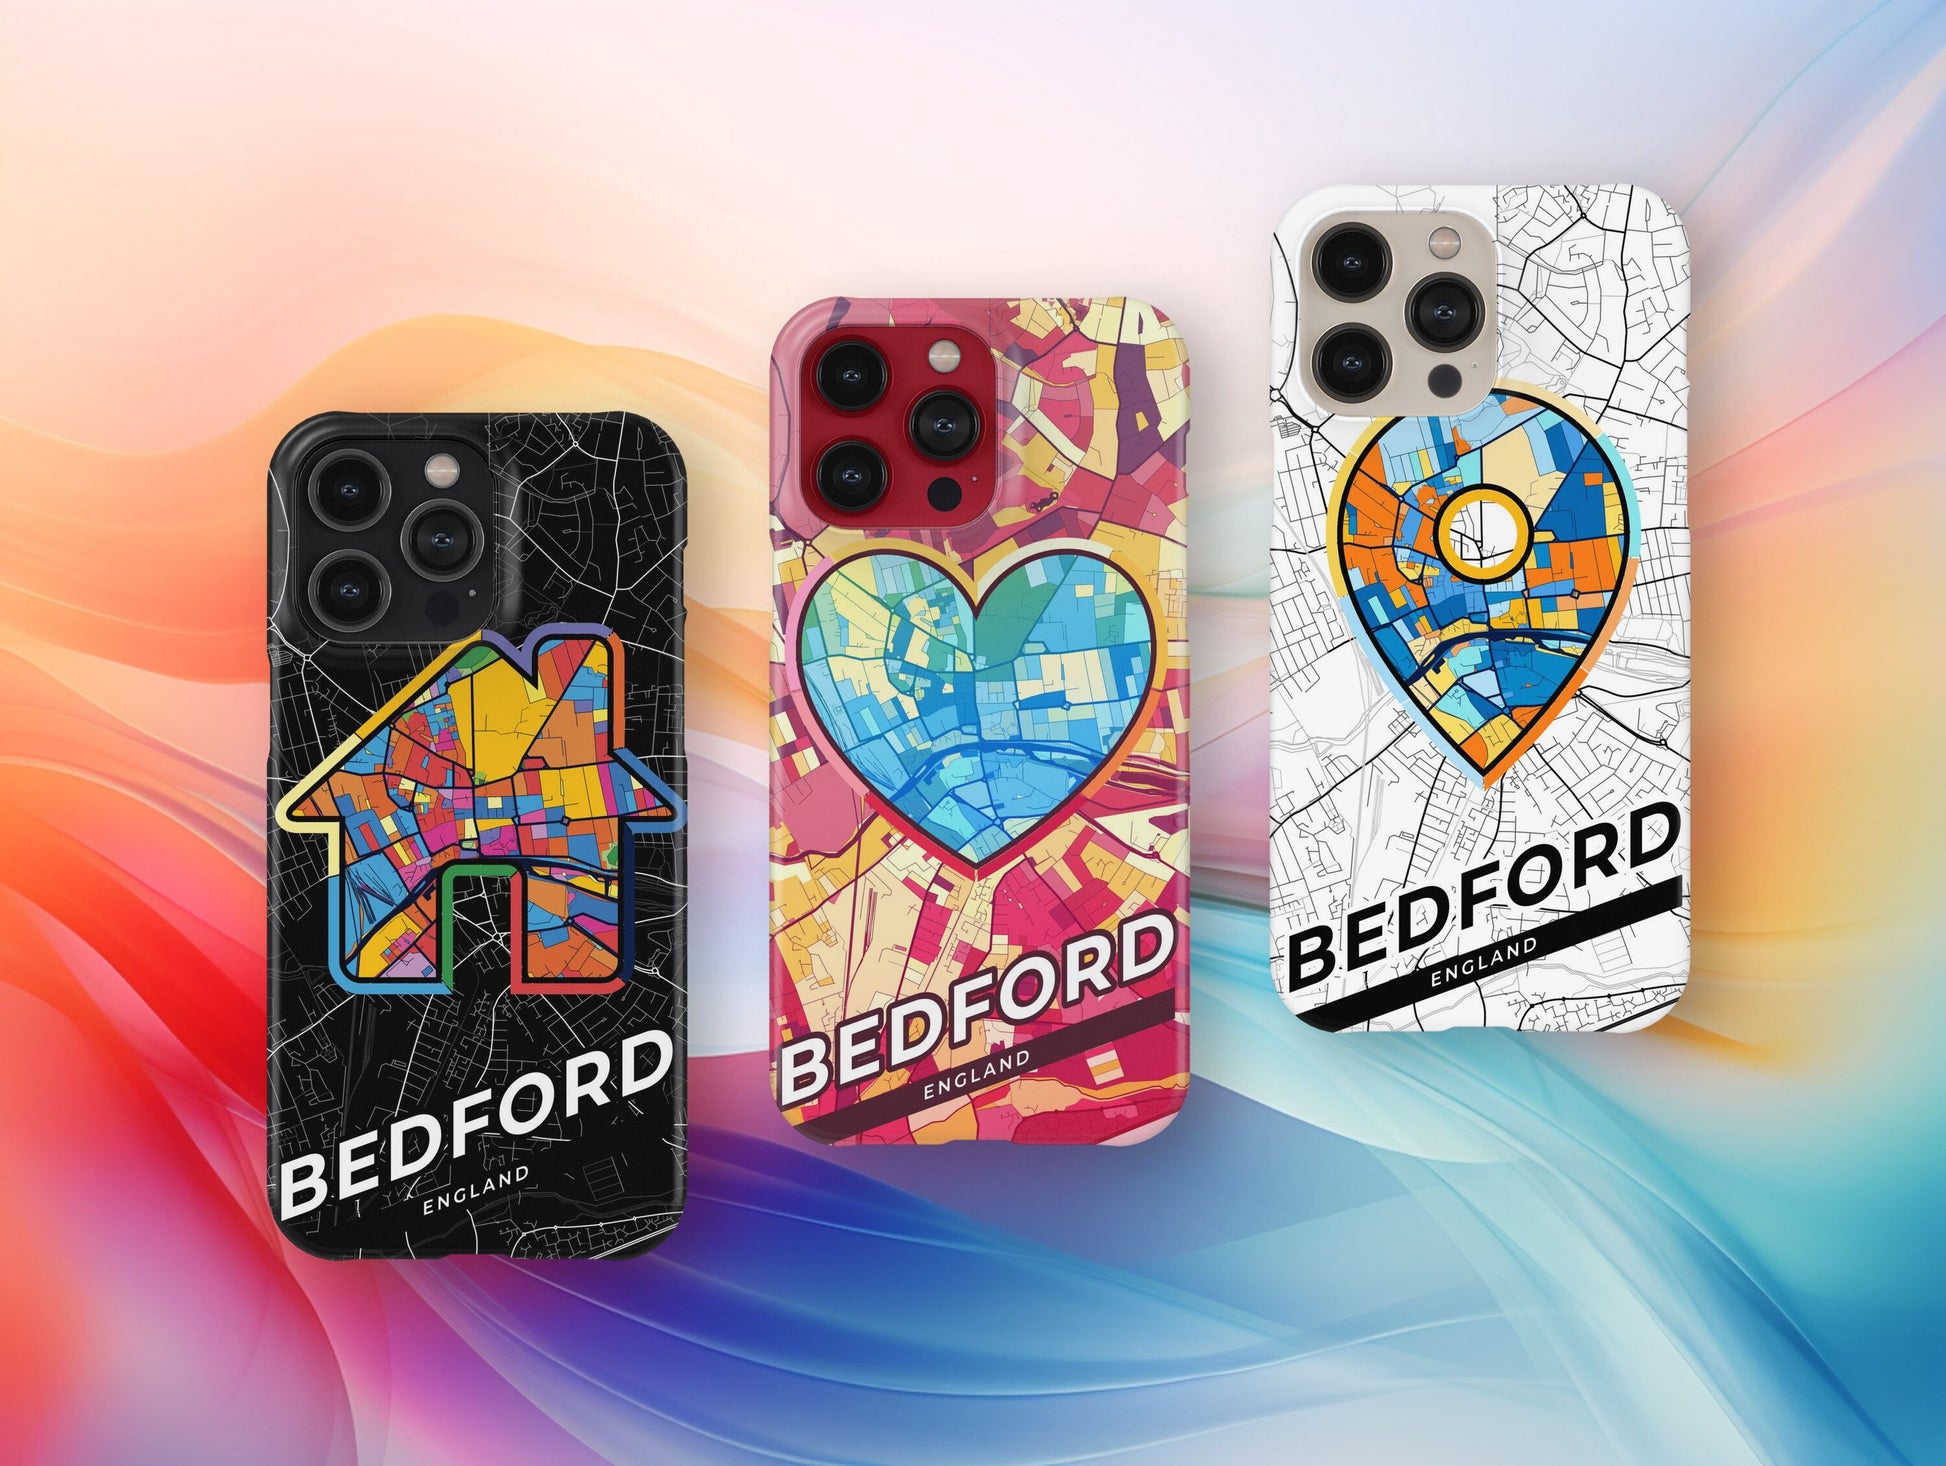 Bedford England slim phone case with colorful icon. Birthday, wedding or housewarming gift. Couple match cases.